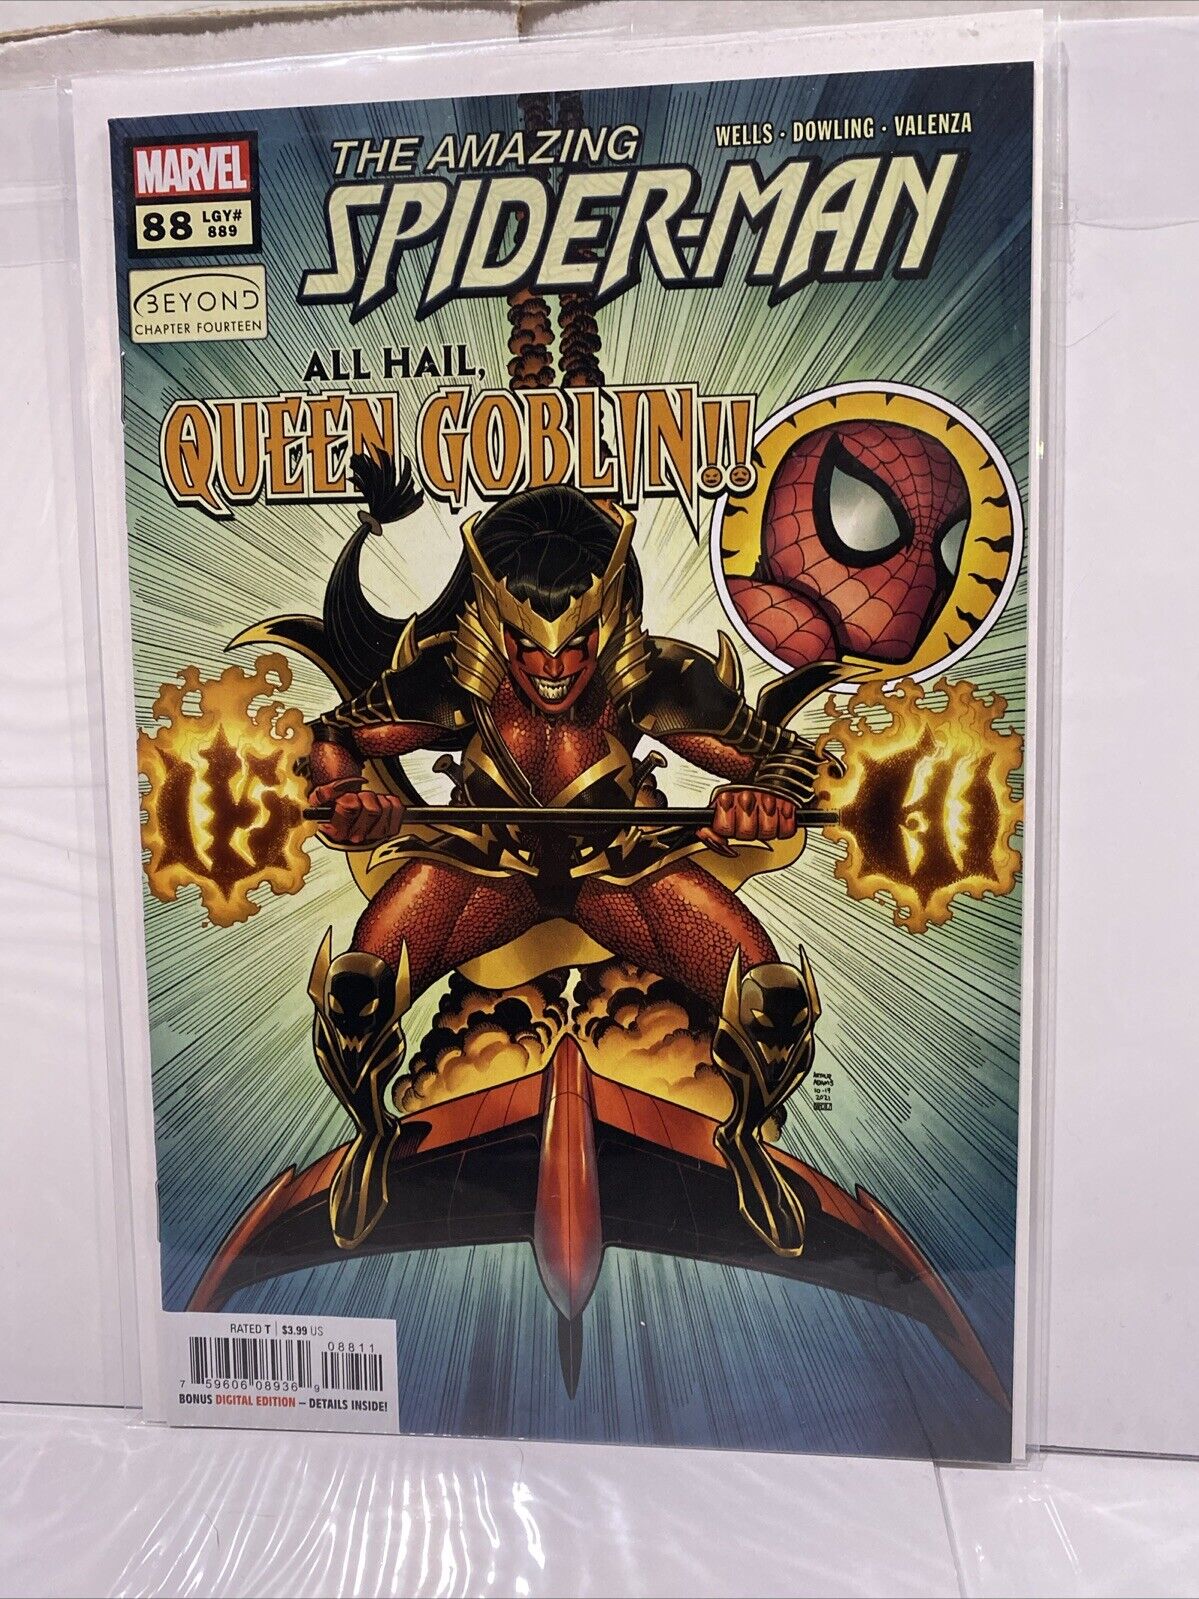 The Amazing Spider-Man Issue #88 Volume 5 (2018) Key Issue Near Mint LGY#889